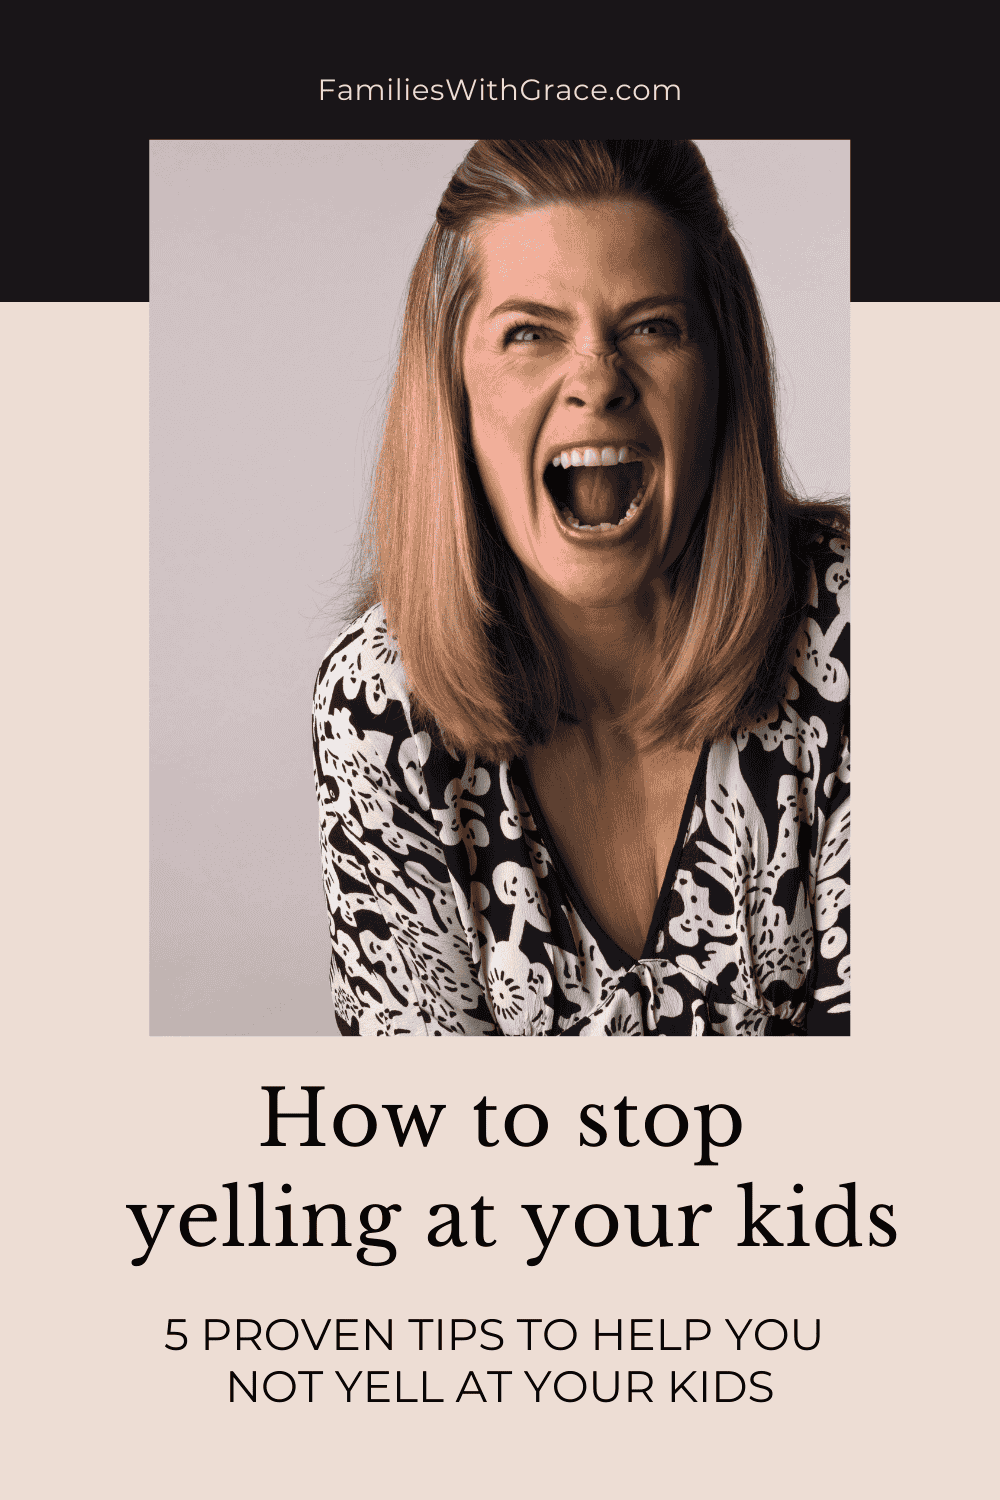 How to not yell at your kids